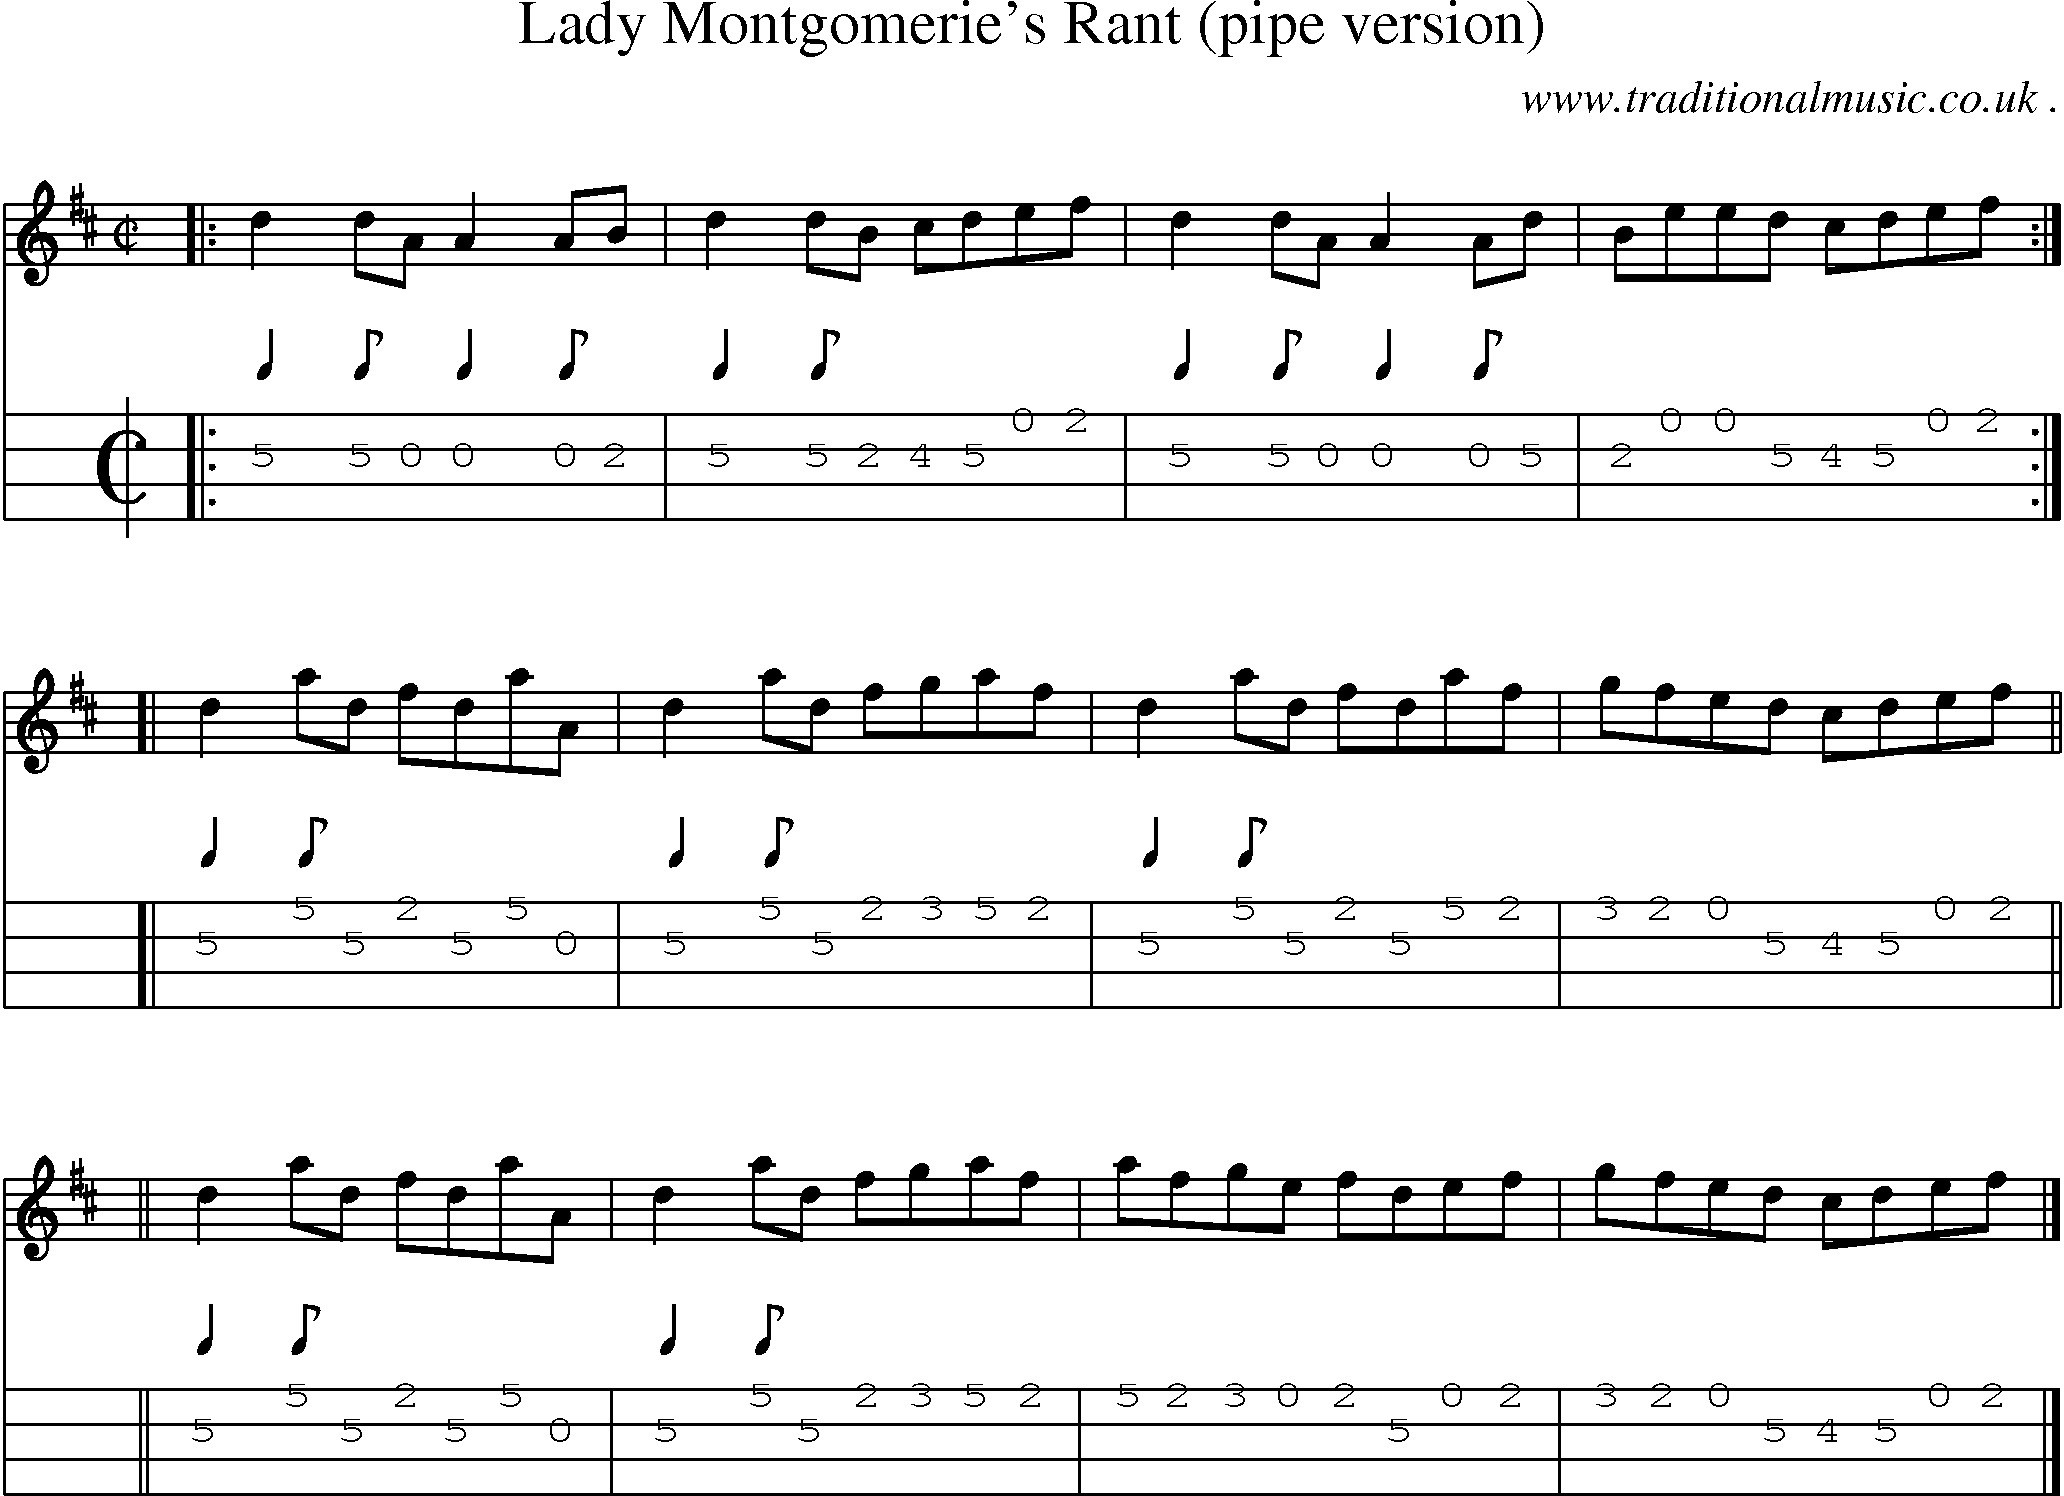 Sheet-music  score, Chords and Mandolin Tabs for Lady Montgomeries Rant Pipe Version